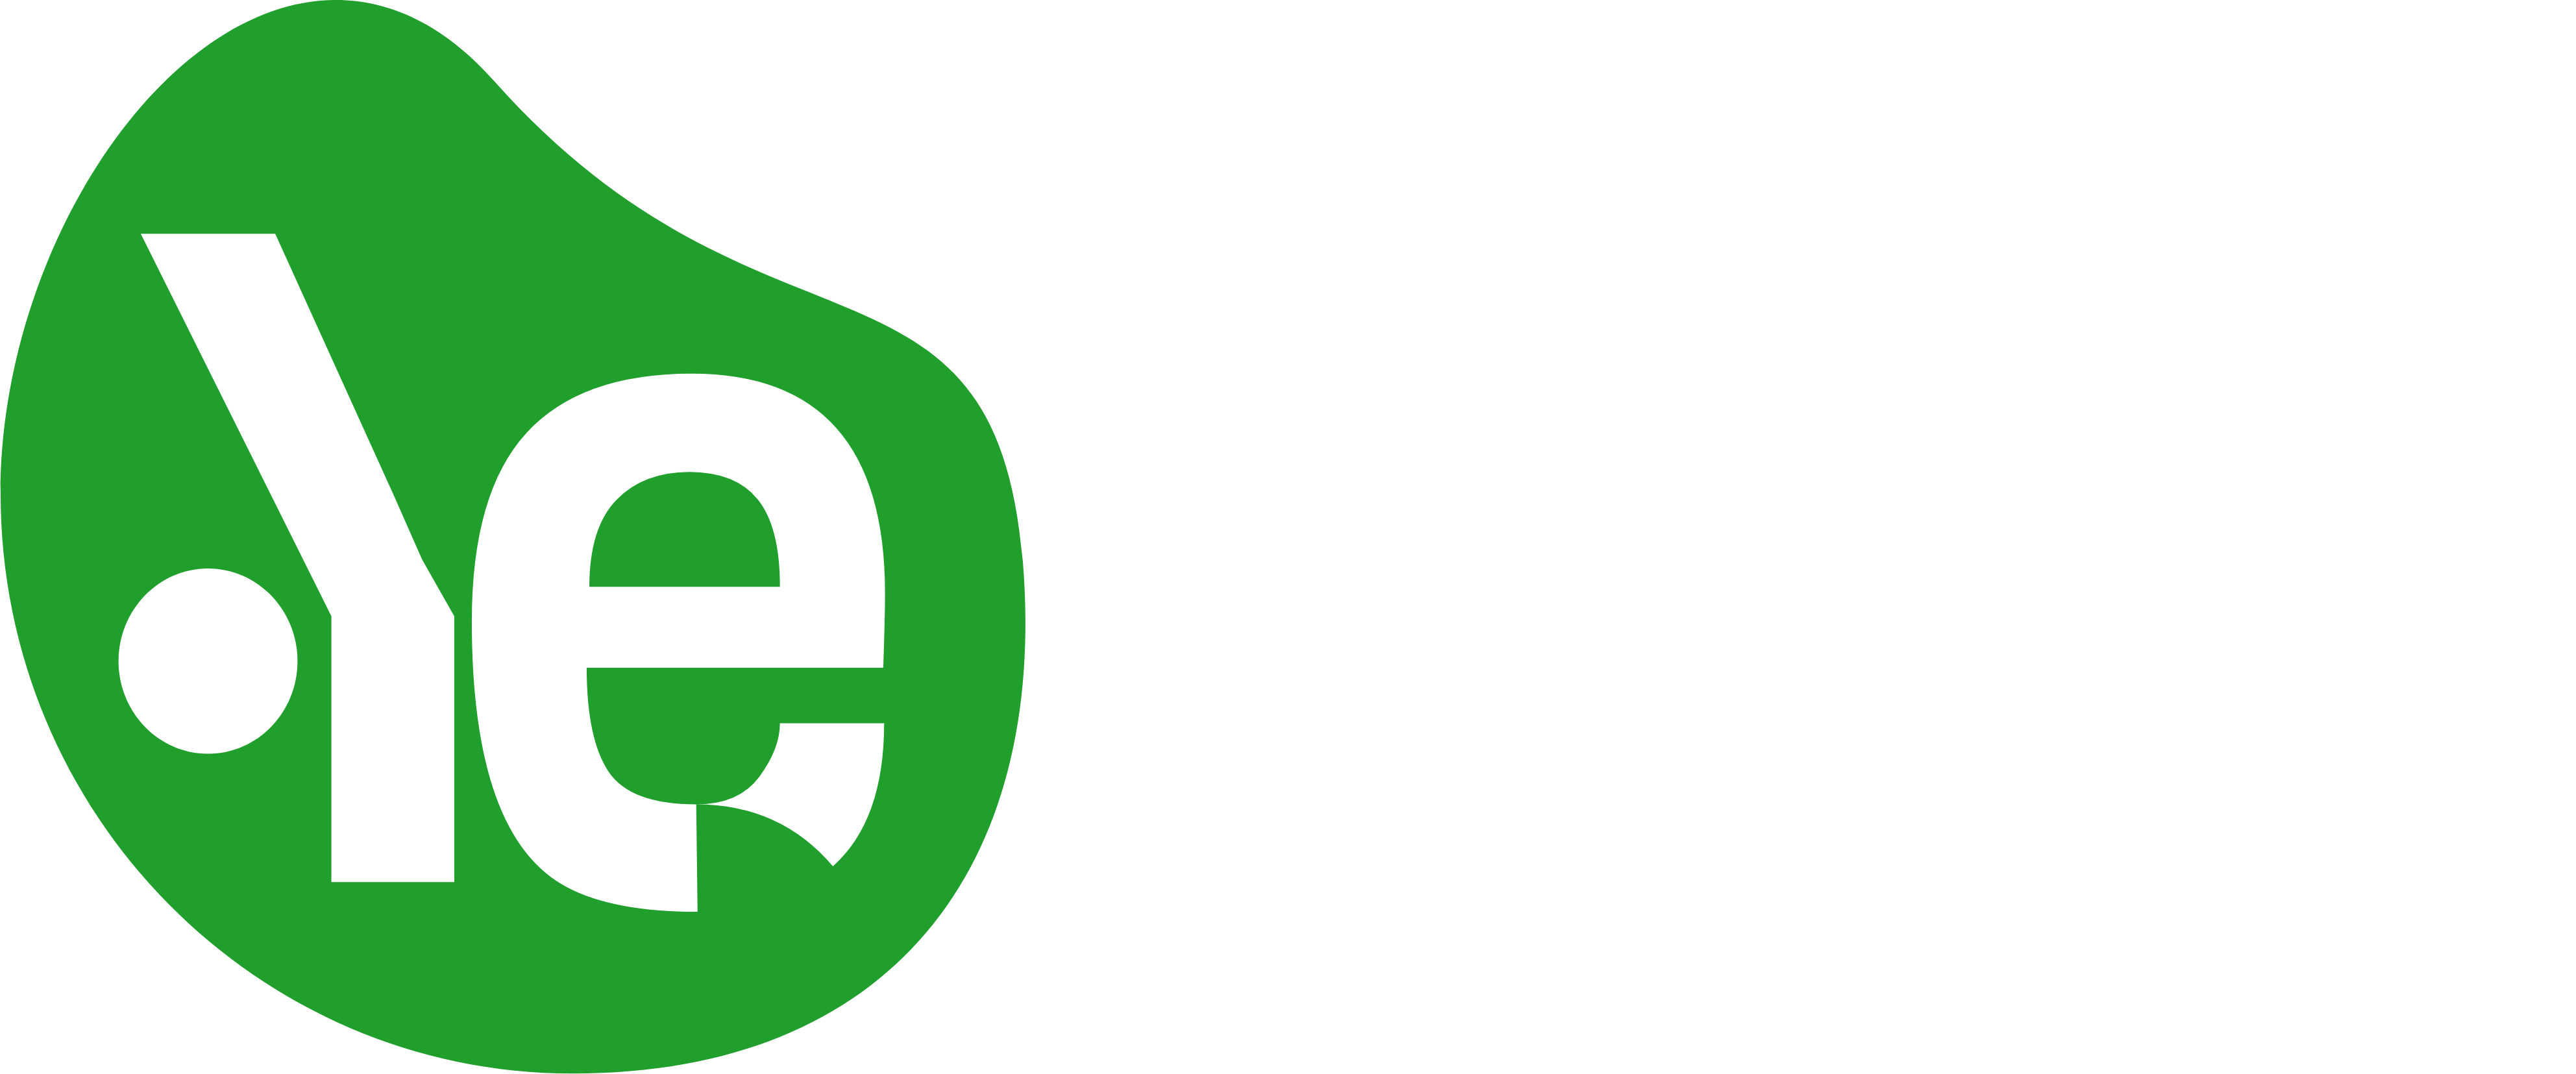 YebbaITS - Technology Consulting & Services